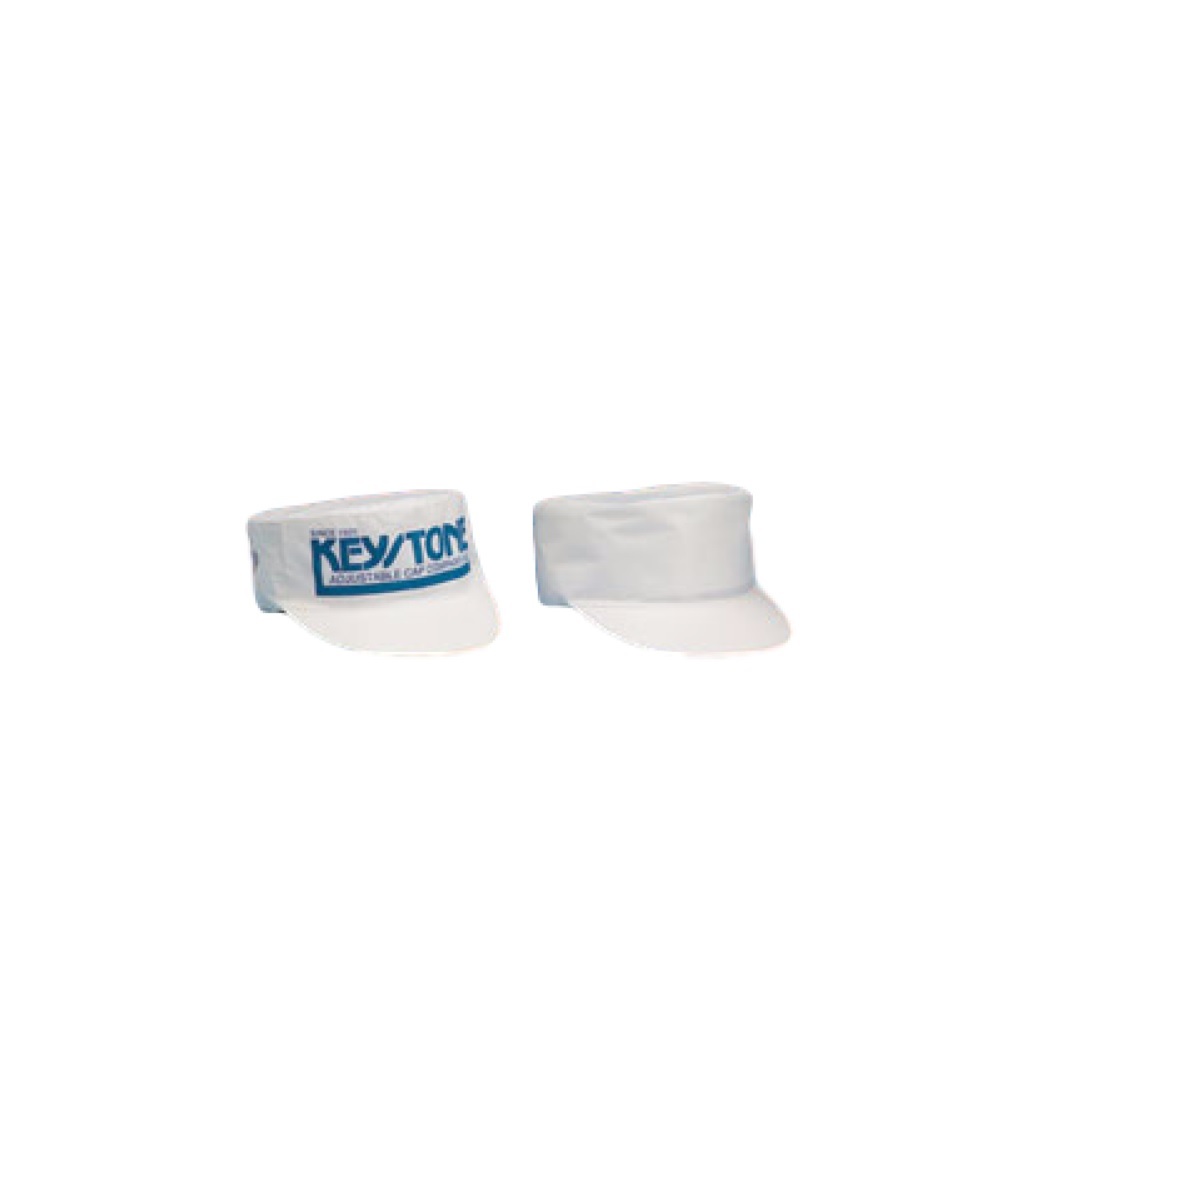 Keystone Safety® One Size Fits Most White Latex Free Tyvek® Olefin Painters Cap